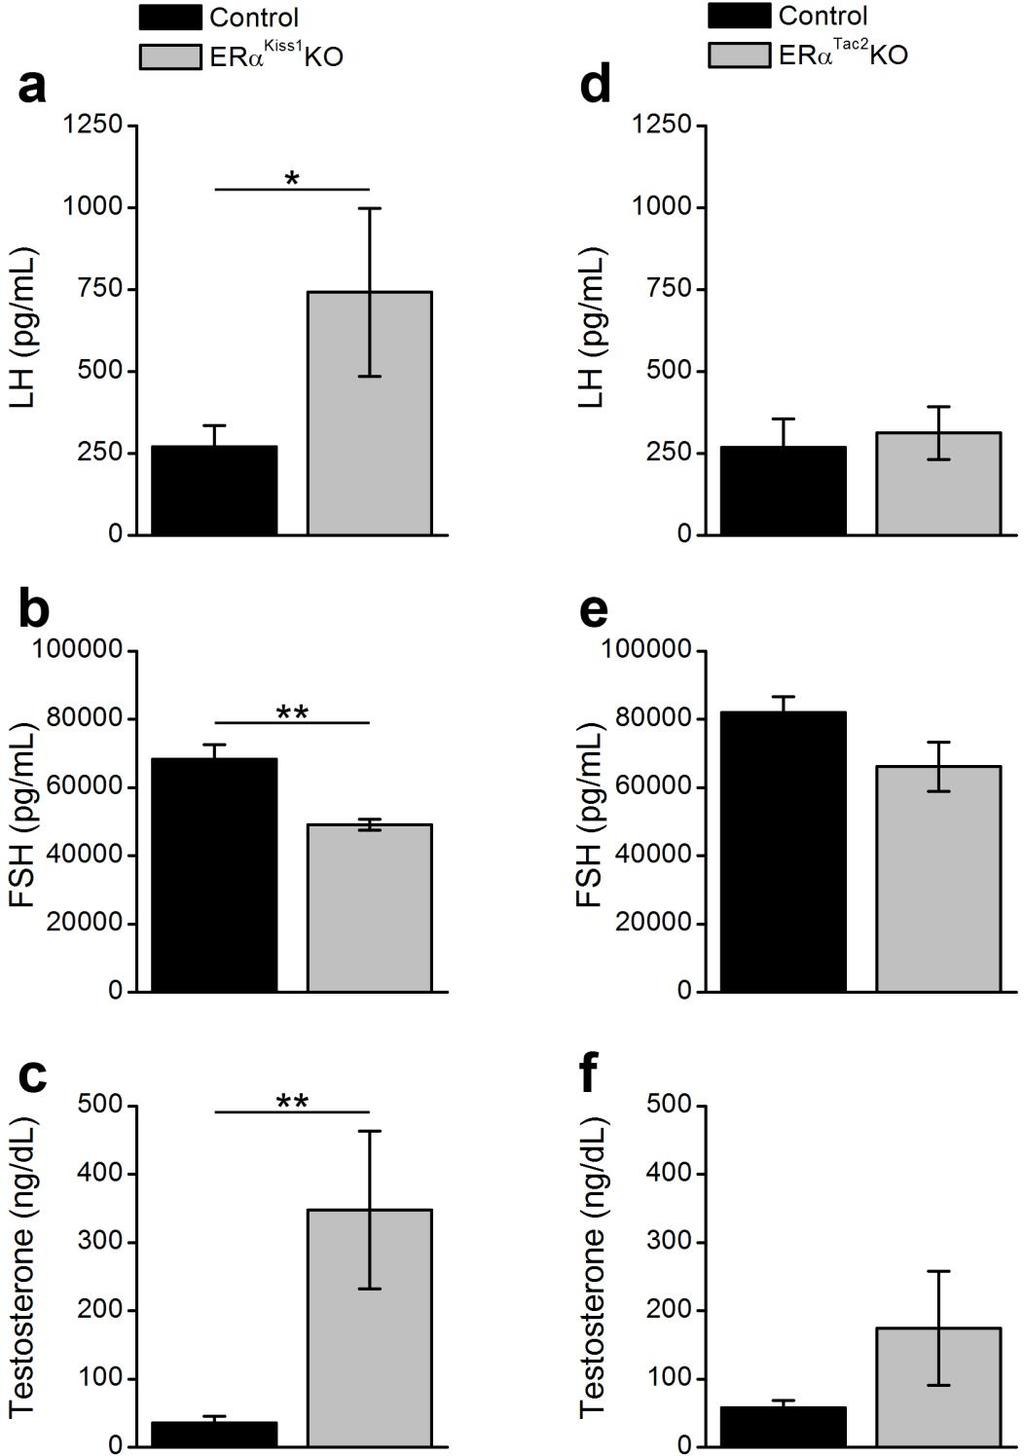 Figure 27 Gonadotropin and gonadal hormone levels are altered by ablation of ERα from all Kiss1- but not Tac2-expressing neurons Serum (a) LH (n = 11-17), (b) FSH (n = 10-20) and (c) testosterone (n